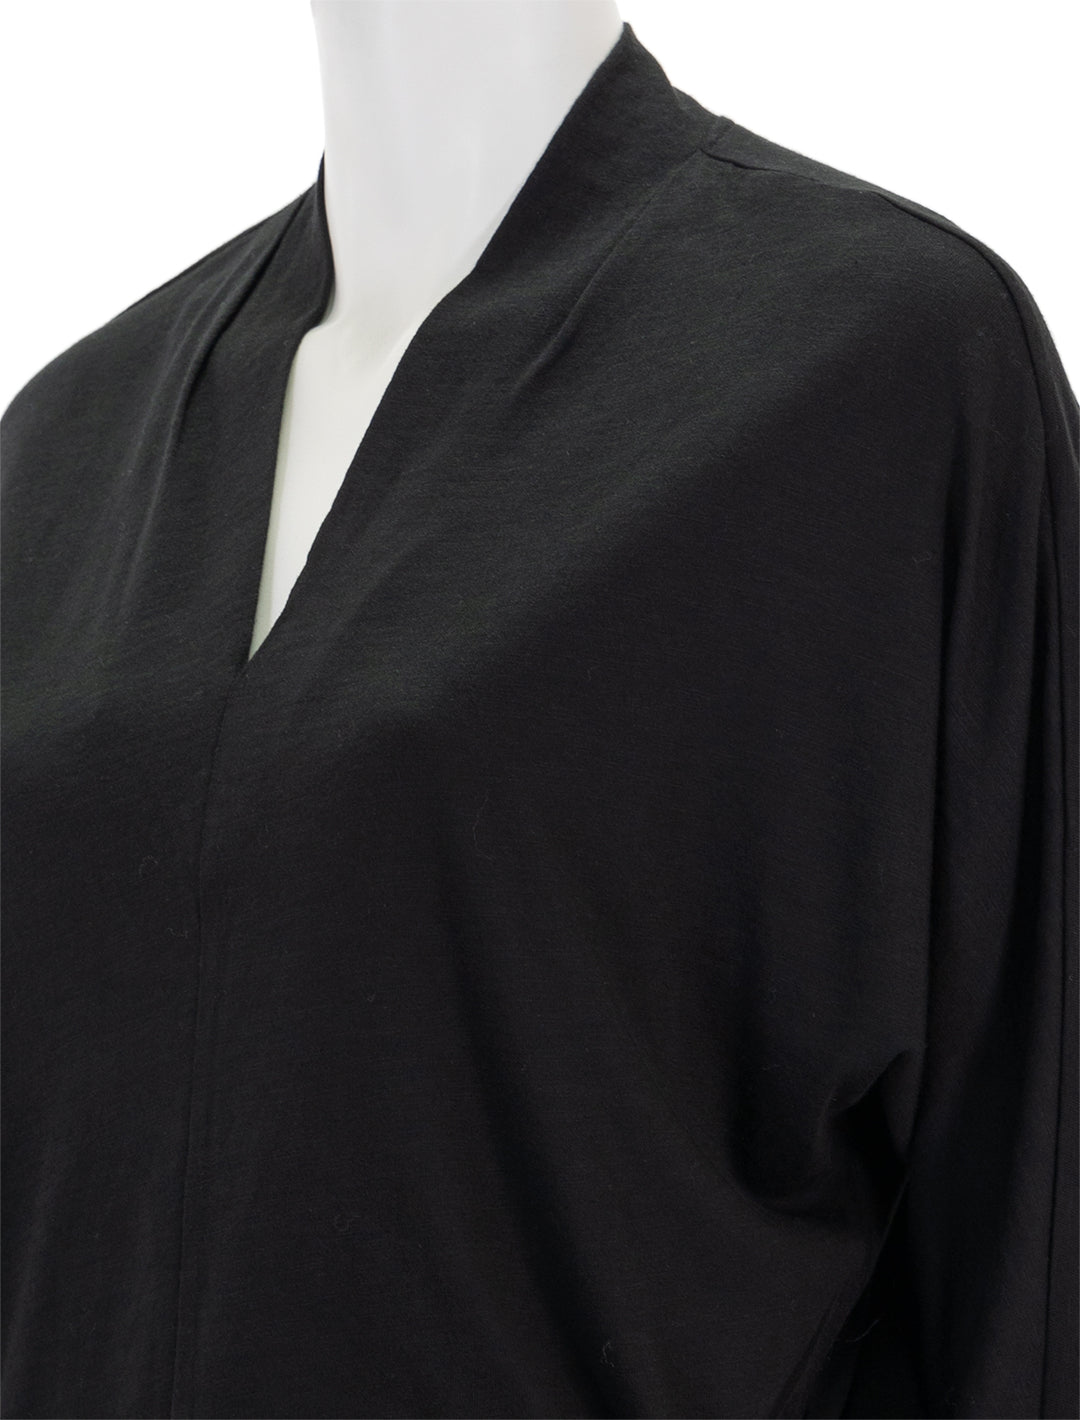 Close-up view of Lilla P.'s full sleeve split neck top in black.